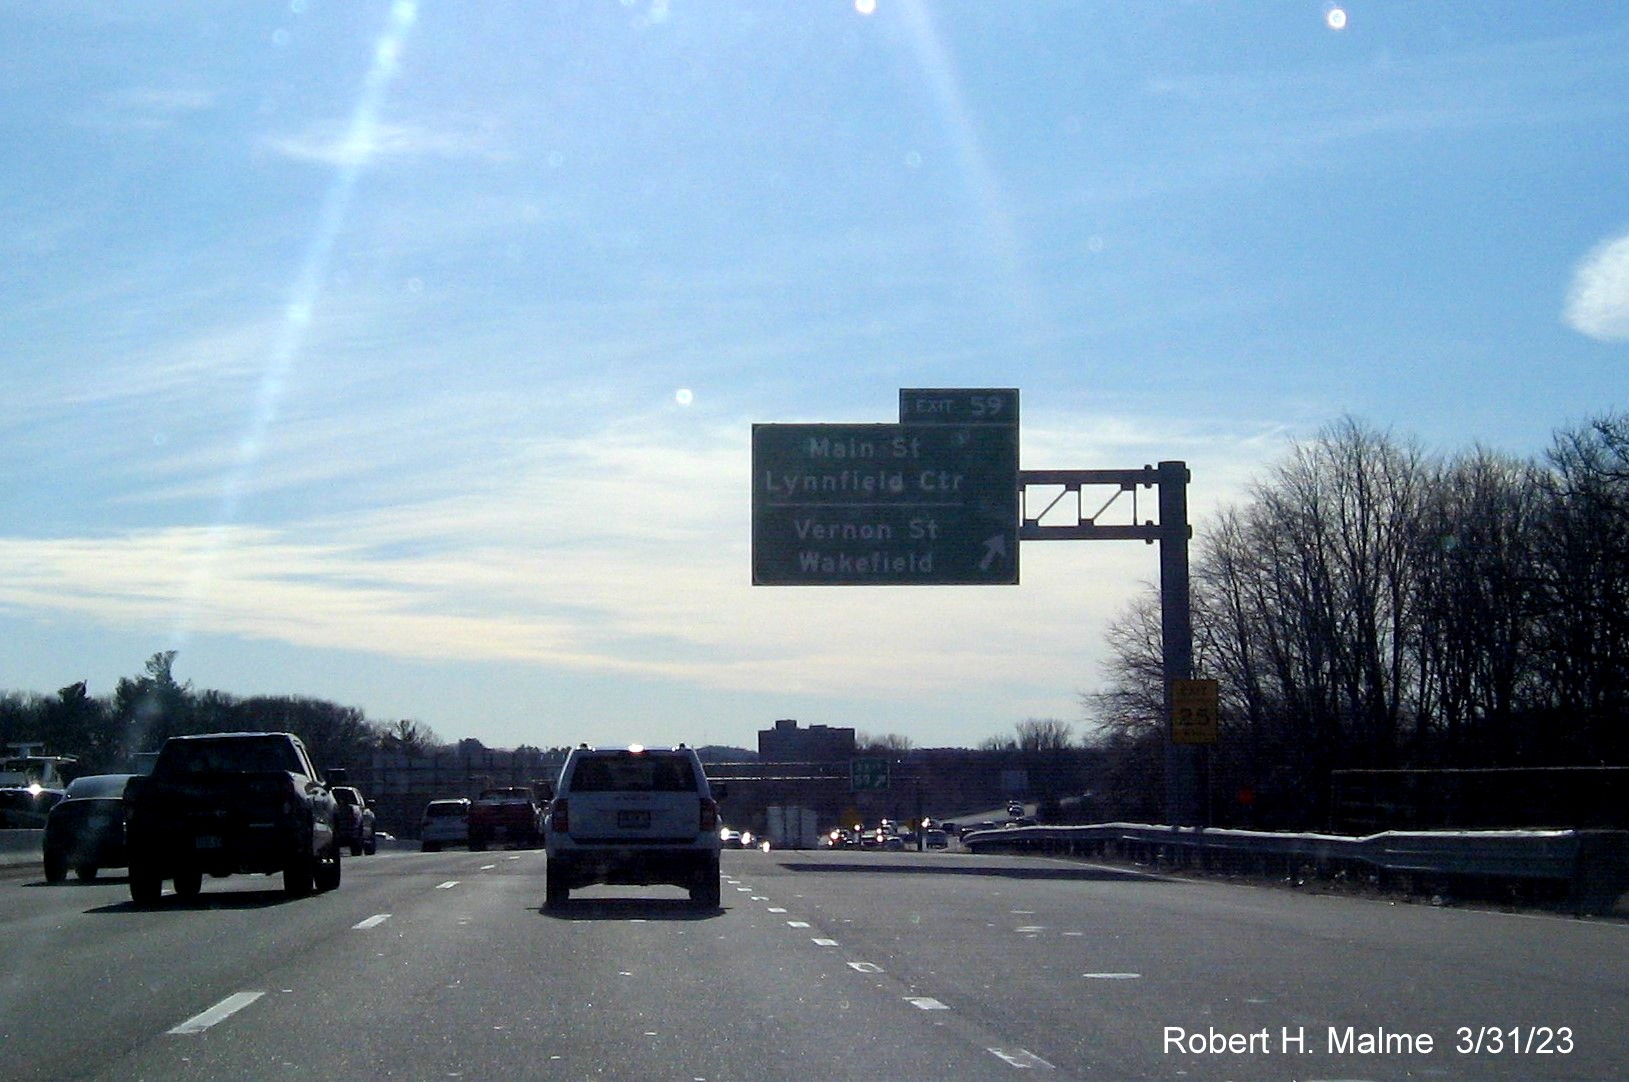 Image of recently placed overhead ramp sign for the Main Street/Vernon Street exit on I-95/MA 128 North in Wakefield, March 2023